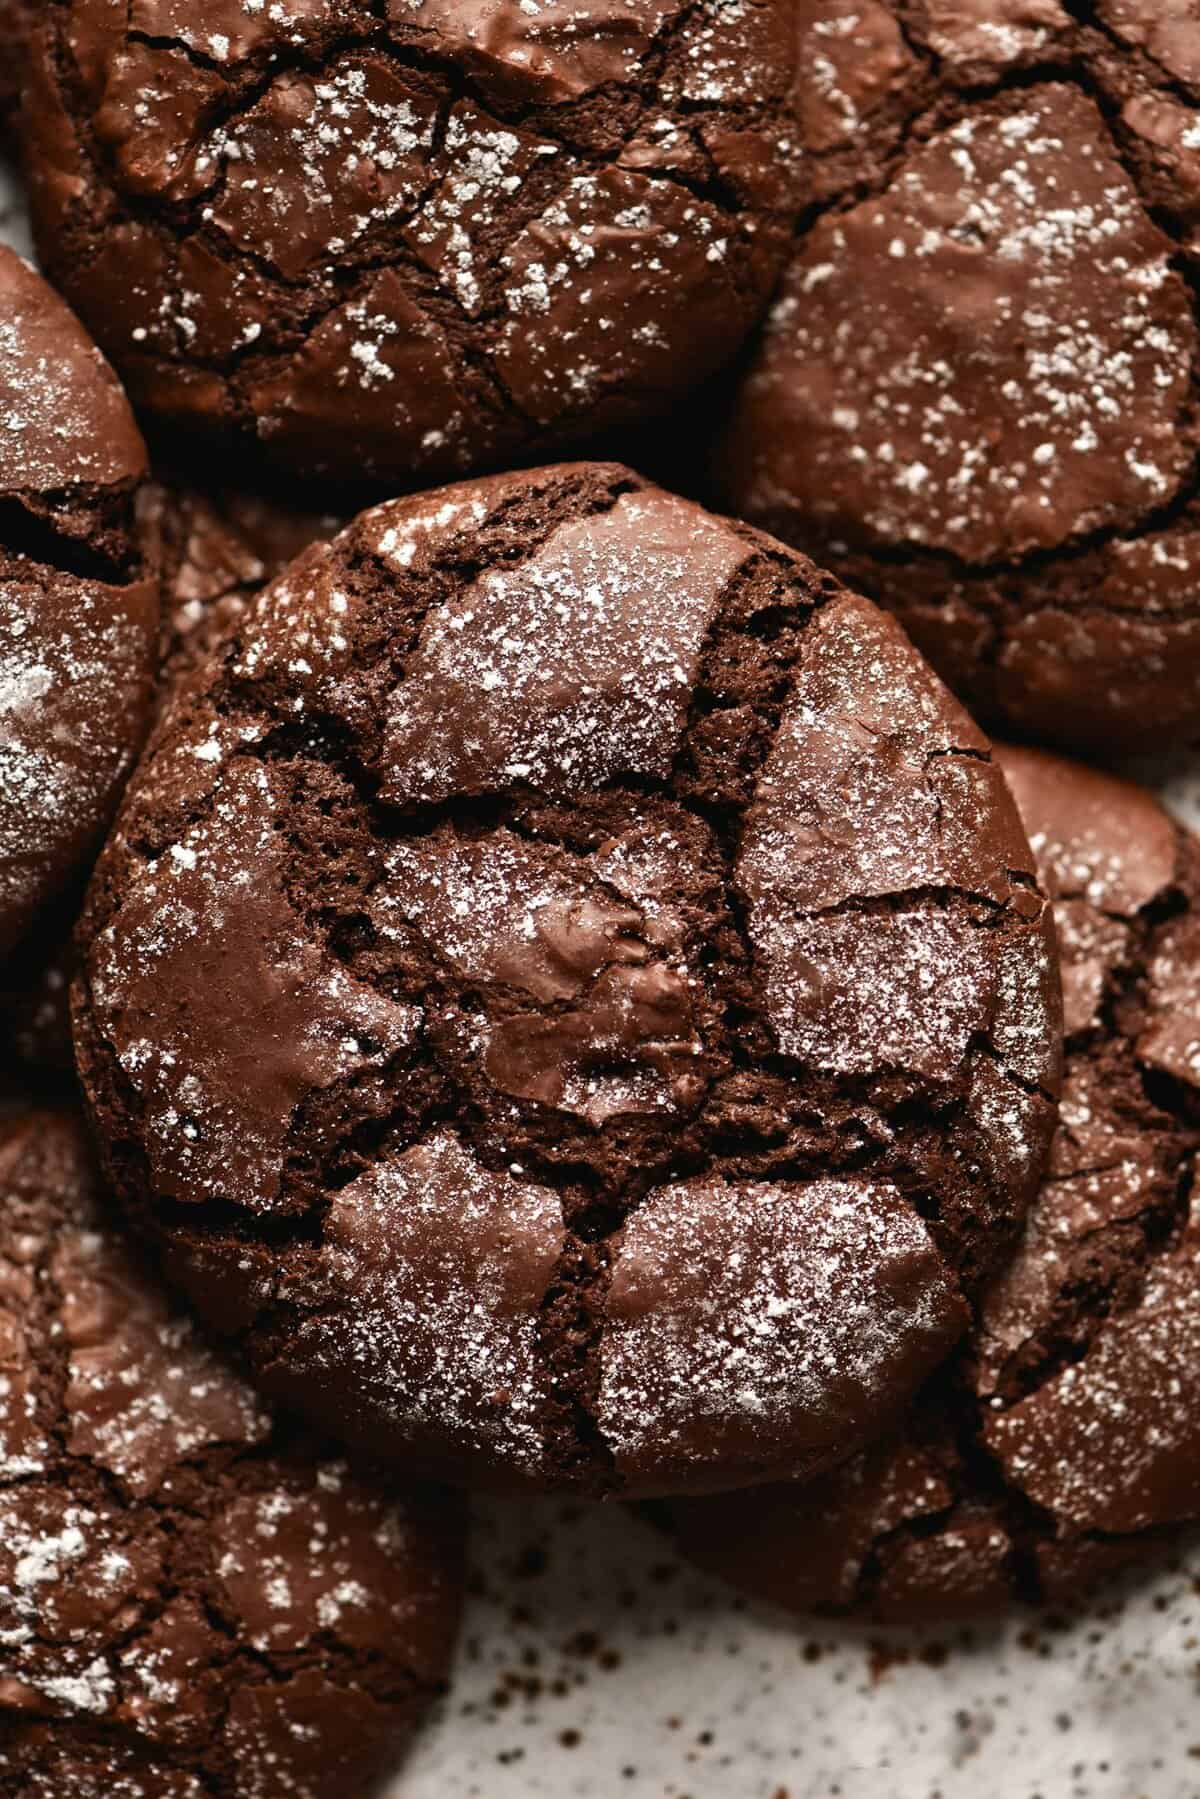 A close up aerial shot of a plate of gluten free chocolate crinkle cookies. The cookies sit in a pile atop a white speckled ceramic plate. They are a deep chocolate colour which contrasts with the icing sugar dusted across their surface.